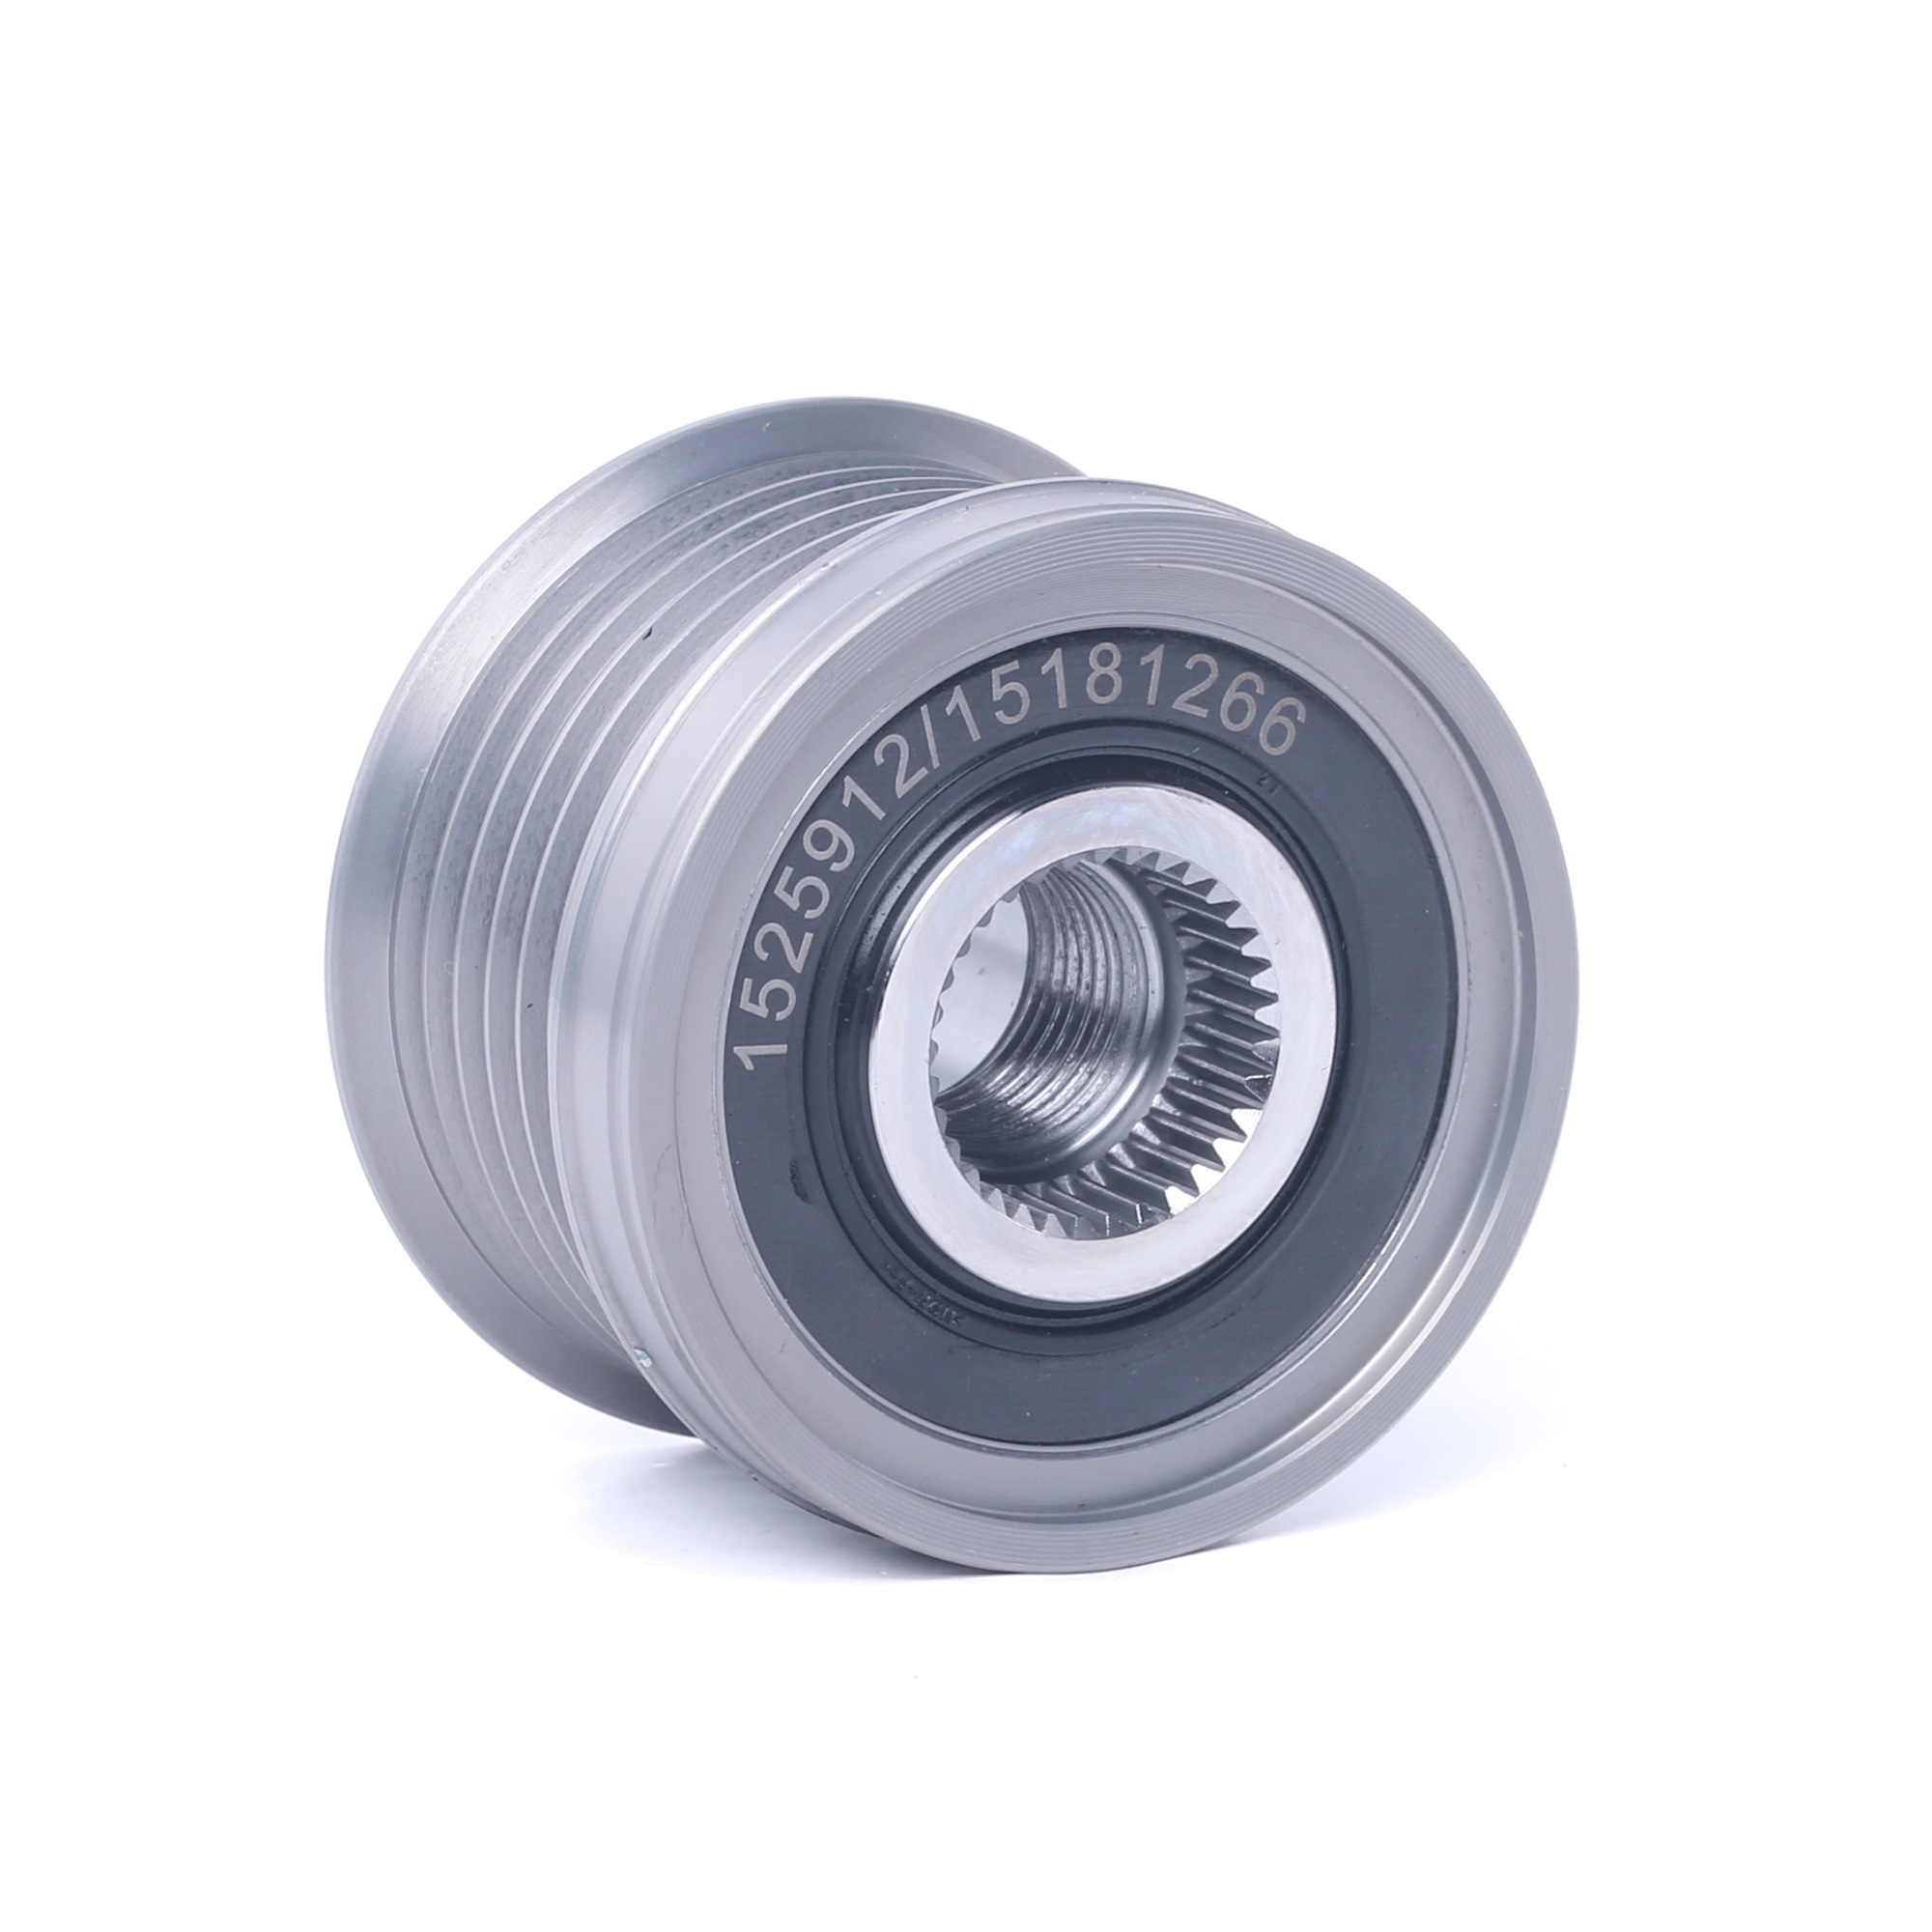 RIDEX 1390F0093 Alternator Freewheel Clutch Width: 34,6mm, Requires special tools for mounting